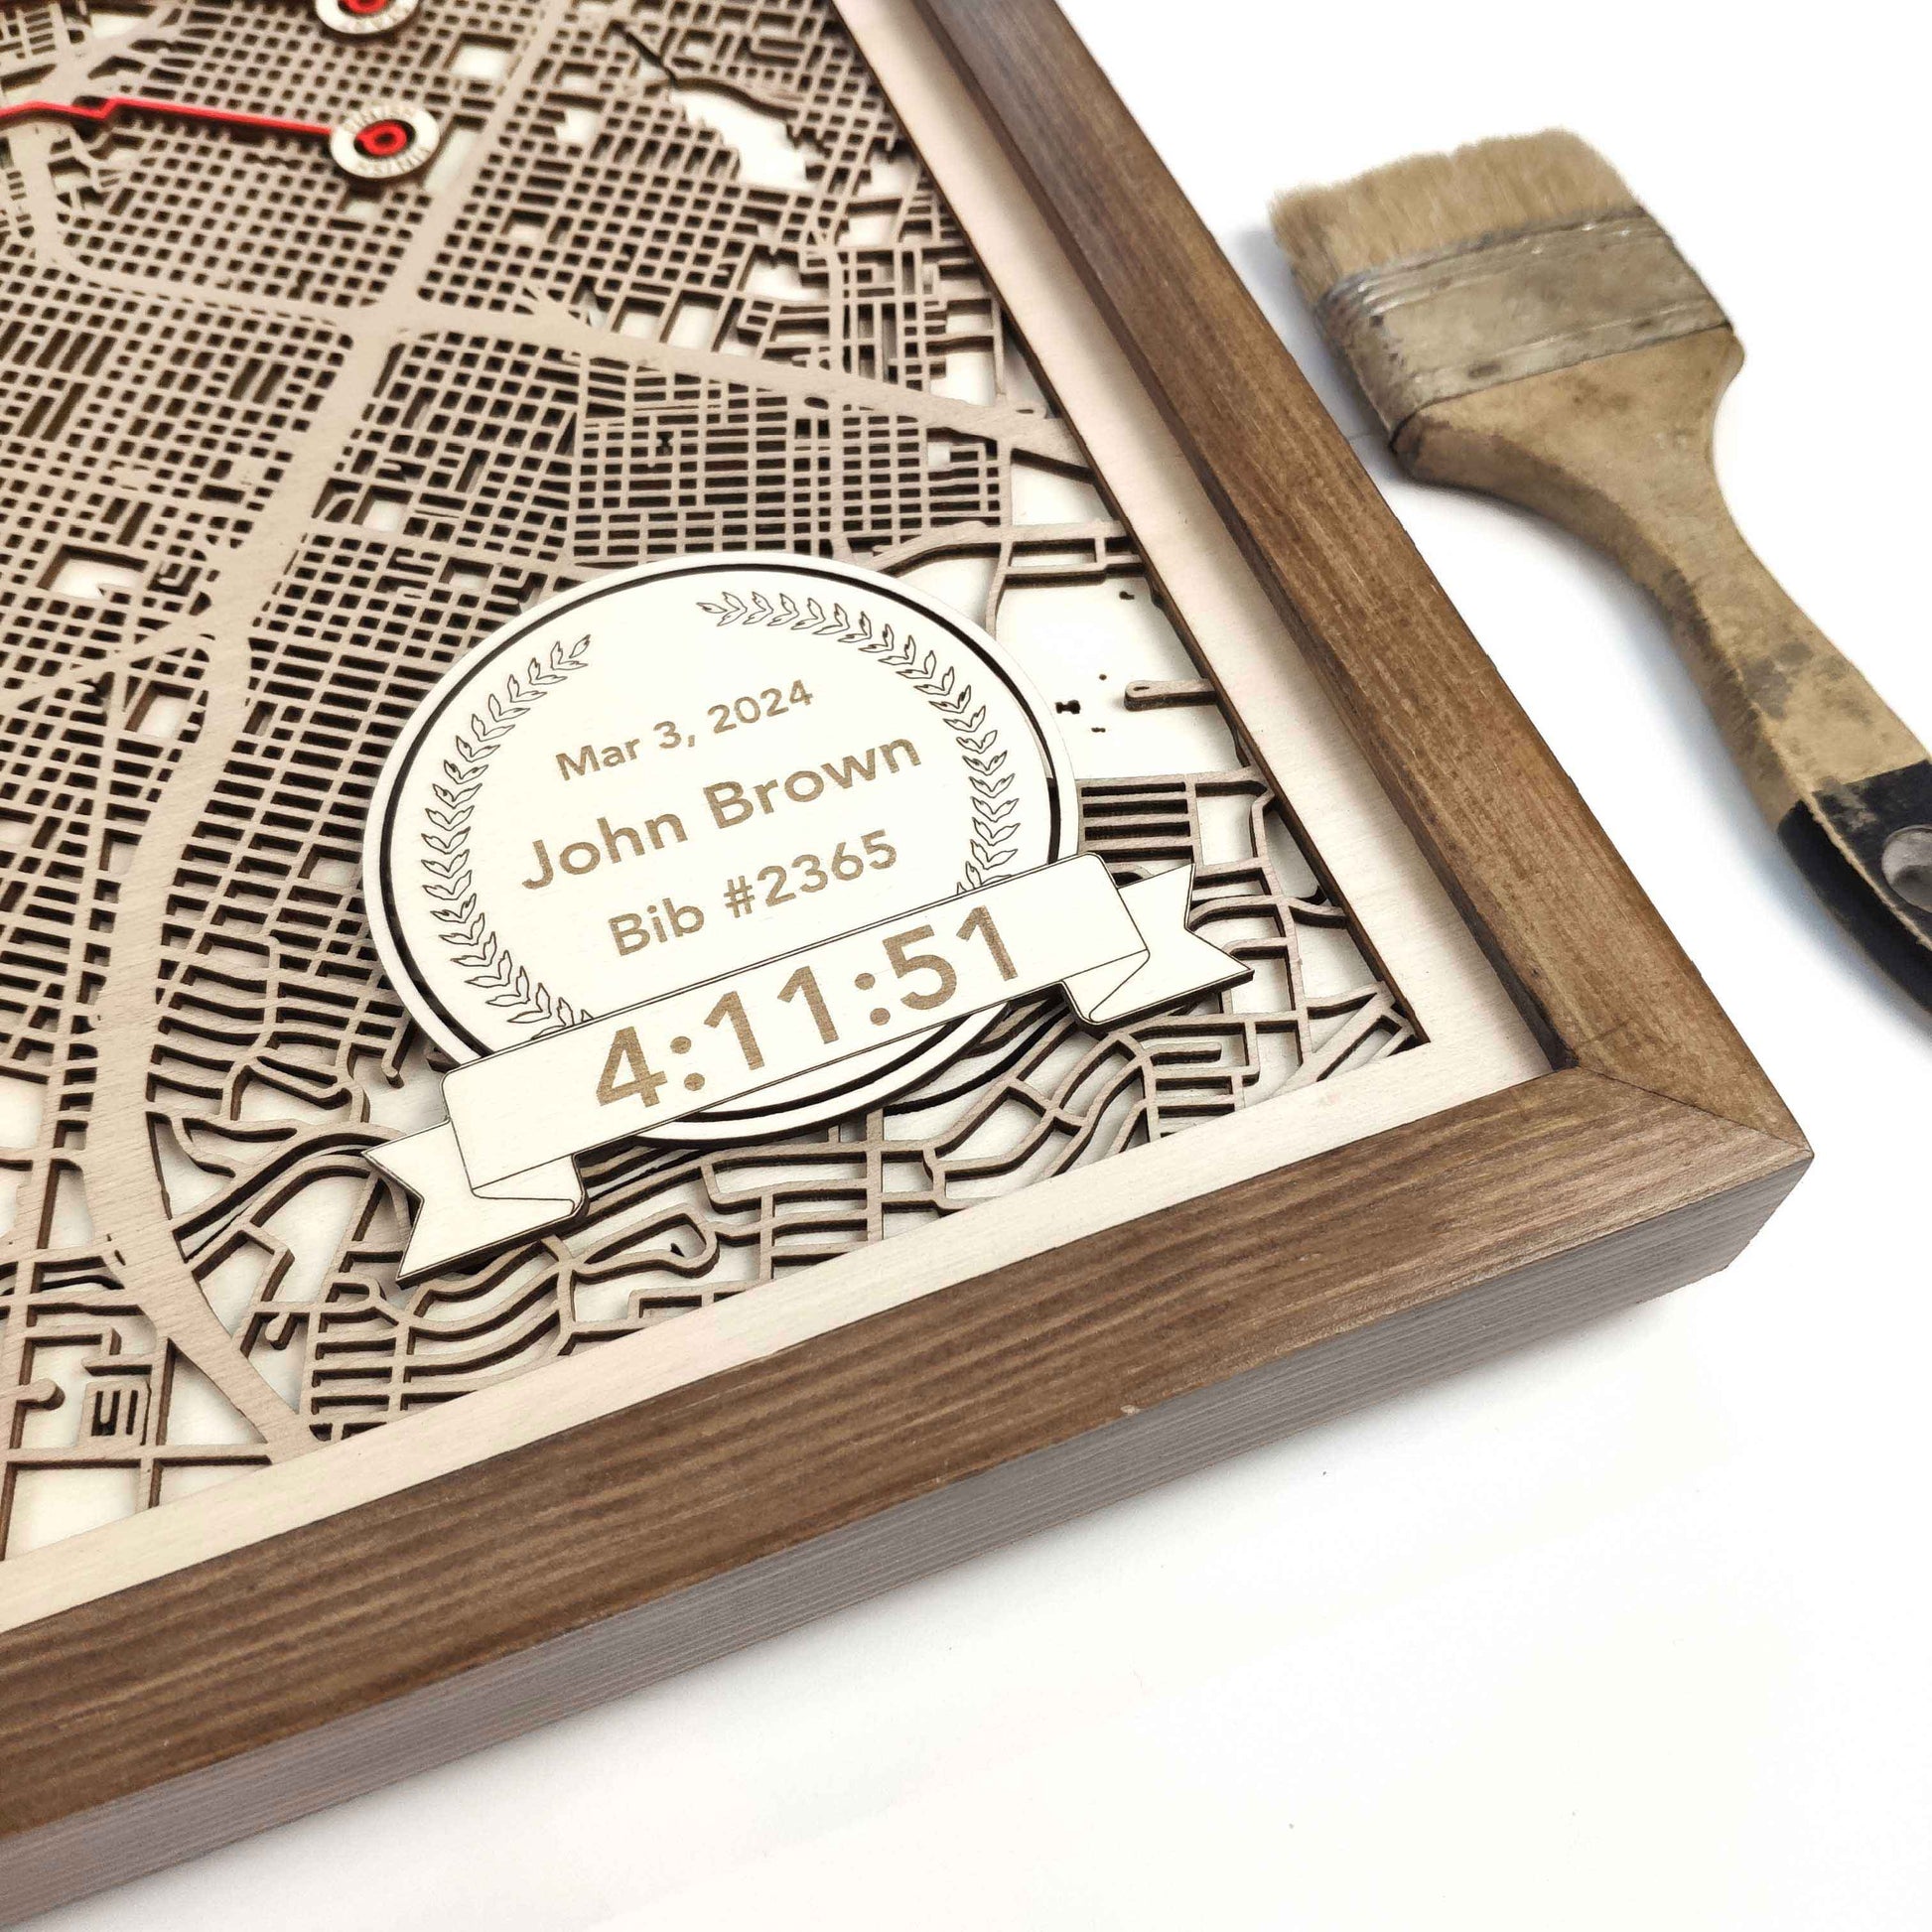 Houston Marathon Laser-Cut Wooden Map – Unique Runner Poster Gift by CityWood - Custom Wood Map Art - Unique Laser Cut Engraved - Anniversary Gift